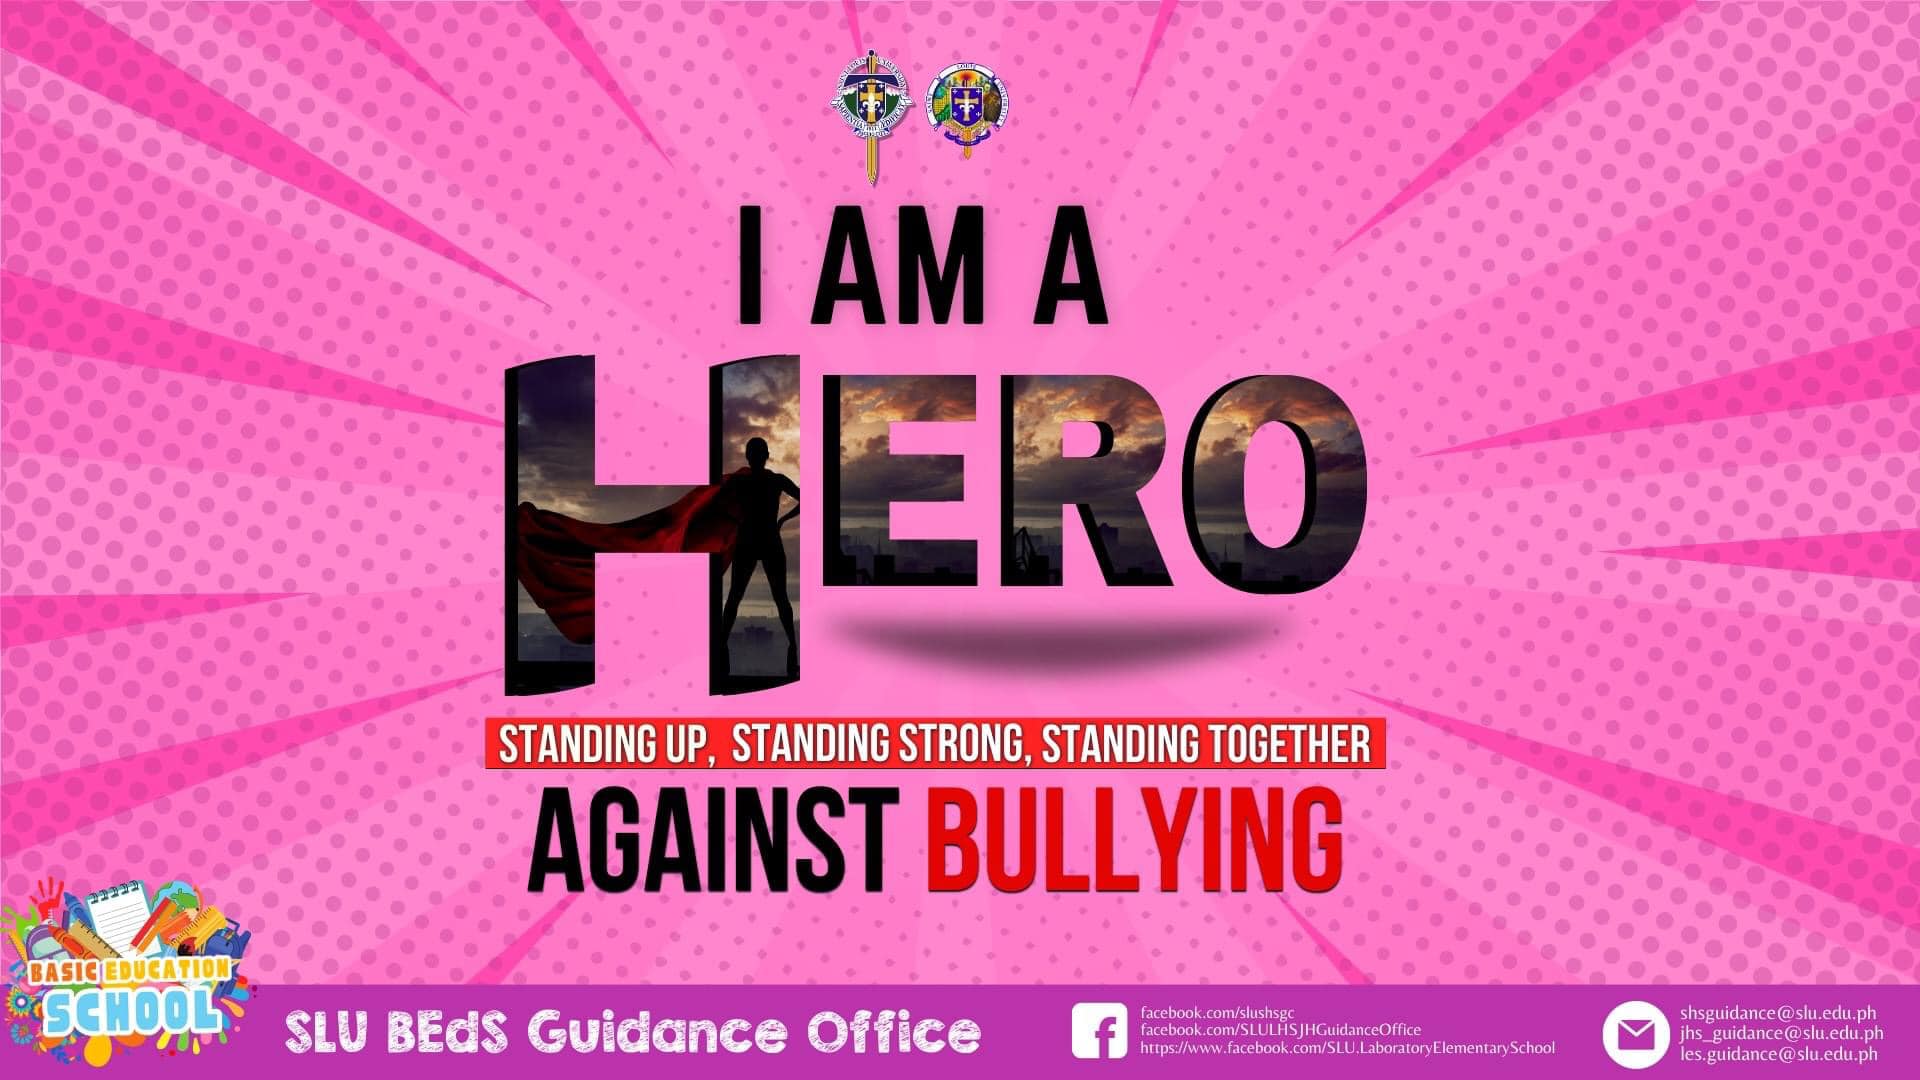 SLU BEdS Community Continues to Take a Stand Against Bullying with Project Hero